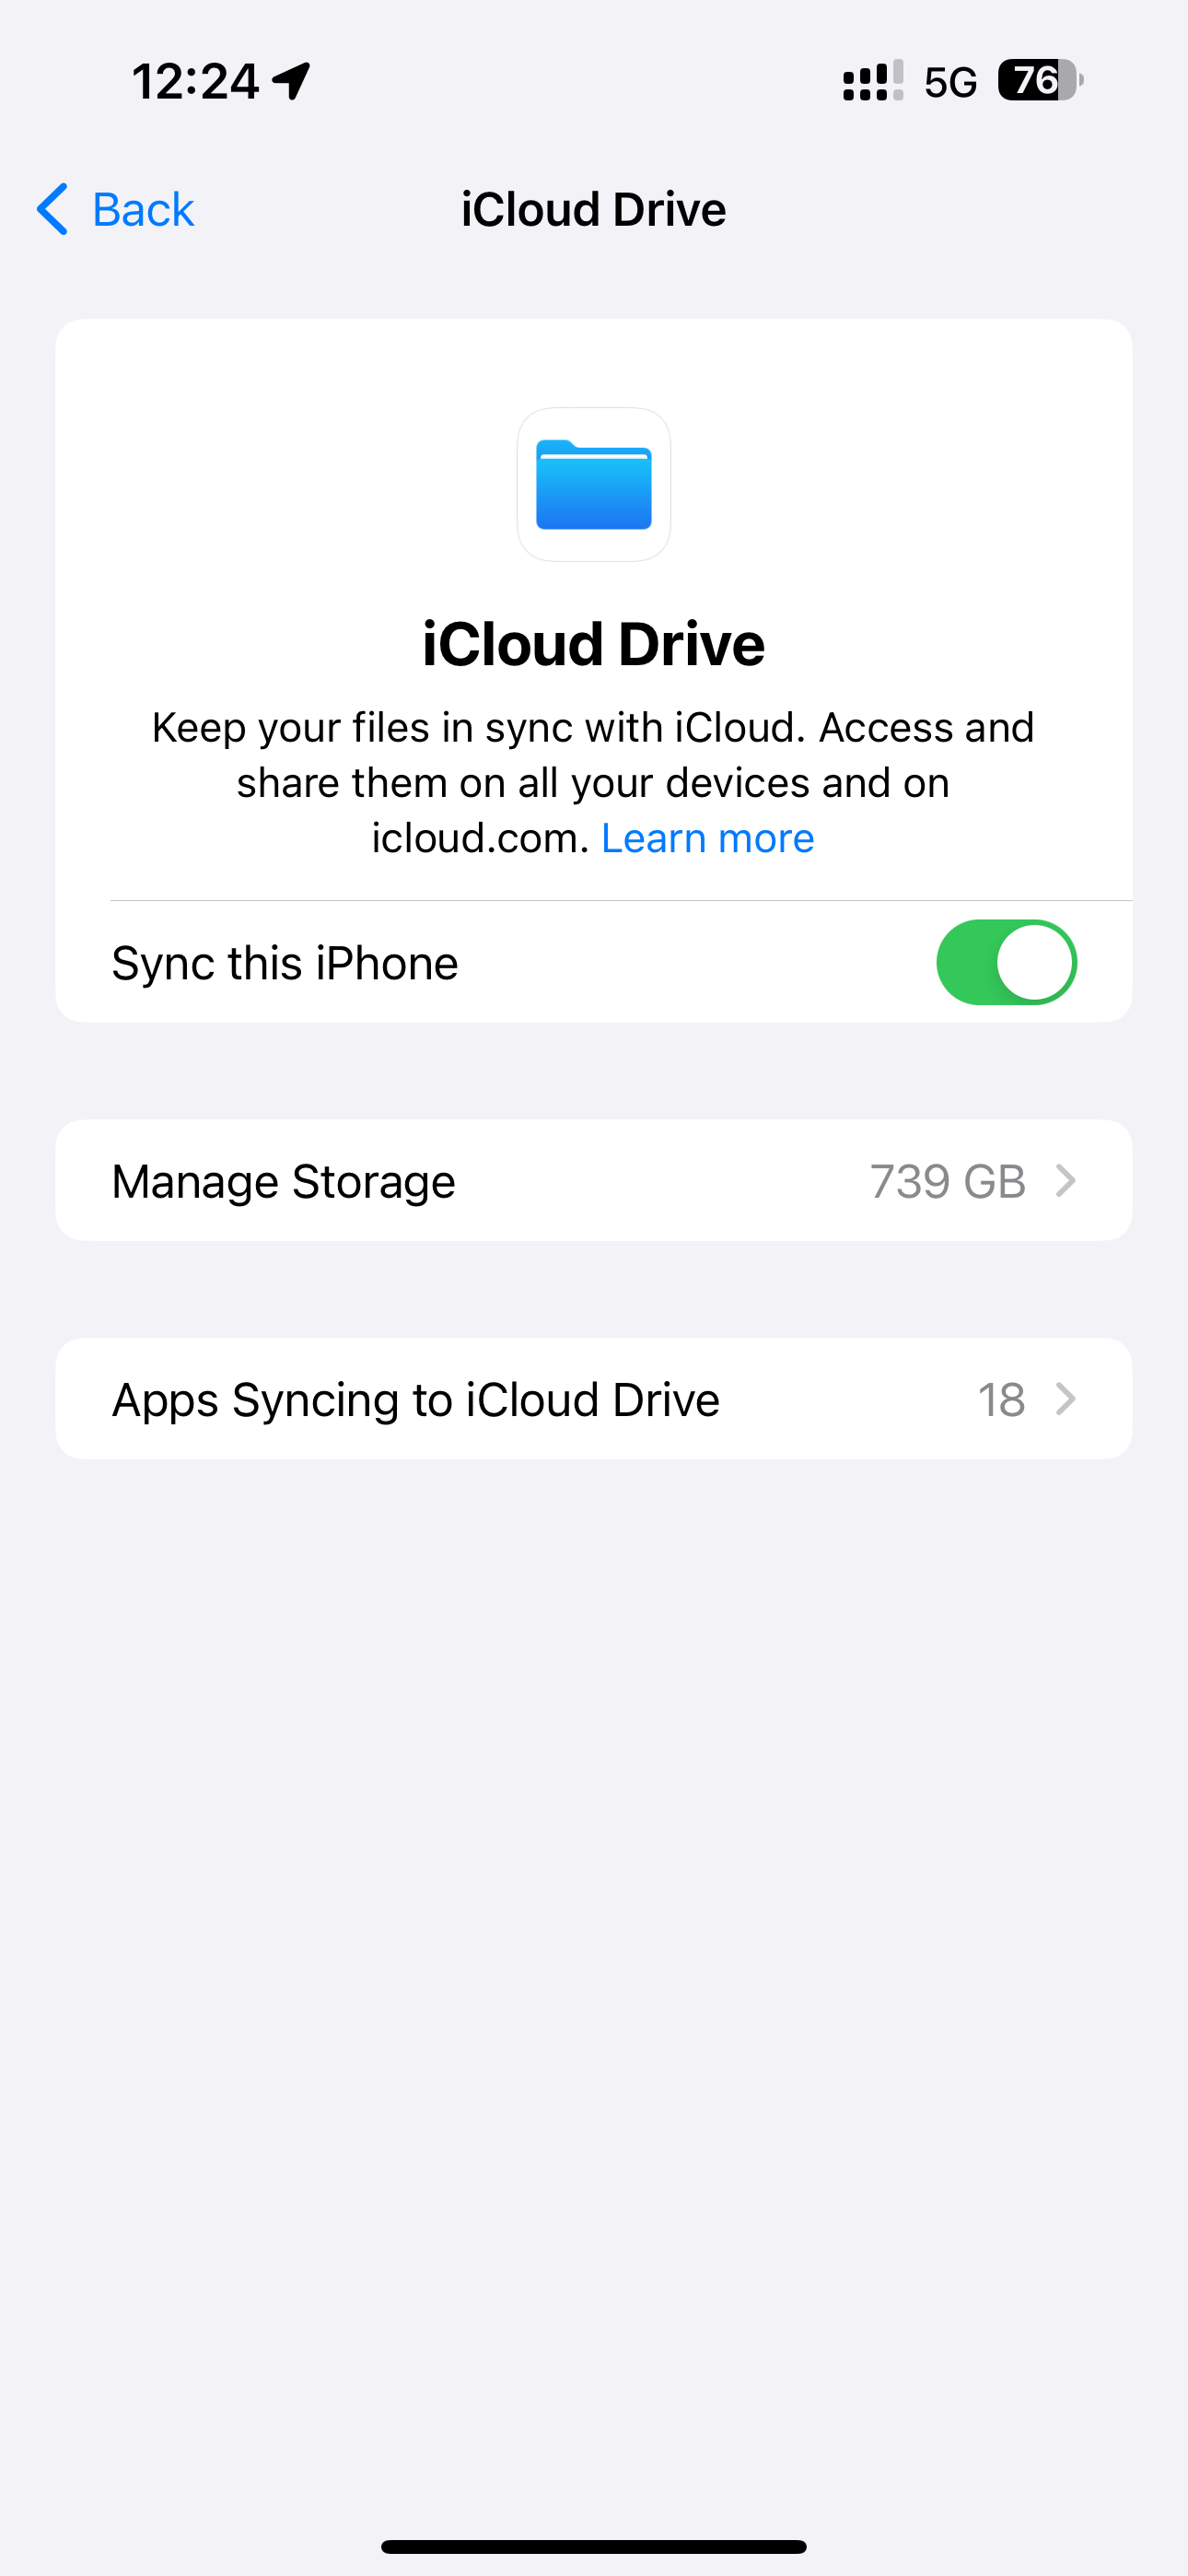 iCloud storage overview for iCloud Drive in the iPhone's Settings app.